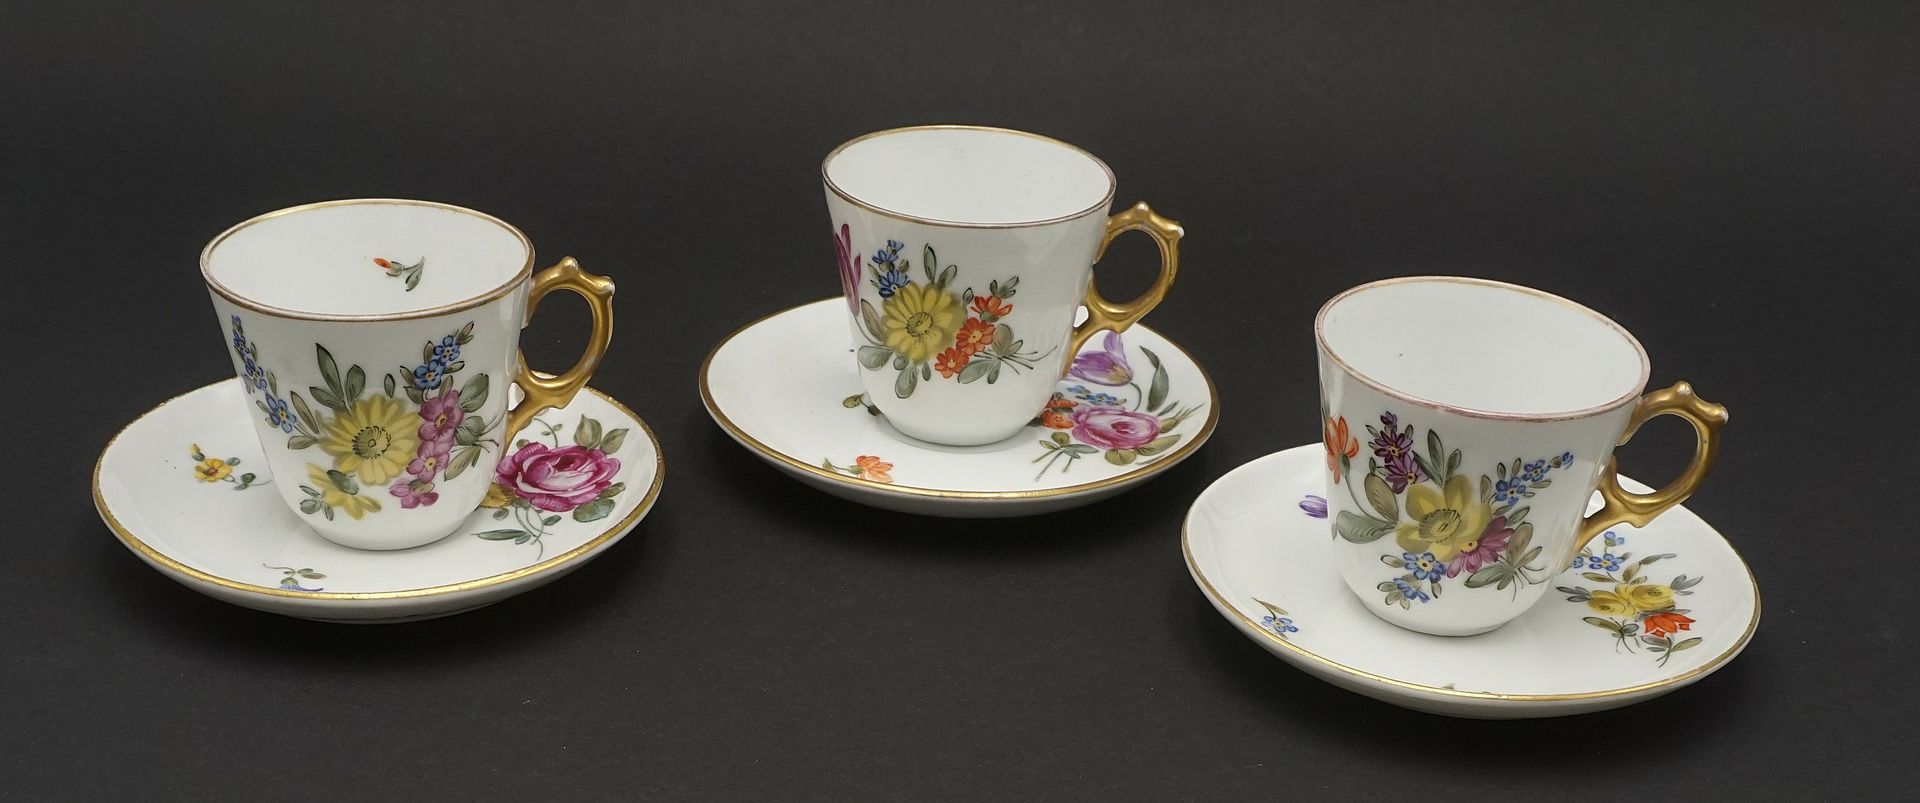 Six Ludwigsburg porcelain mocha cups and saucers - Image 3 of 4